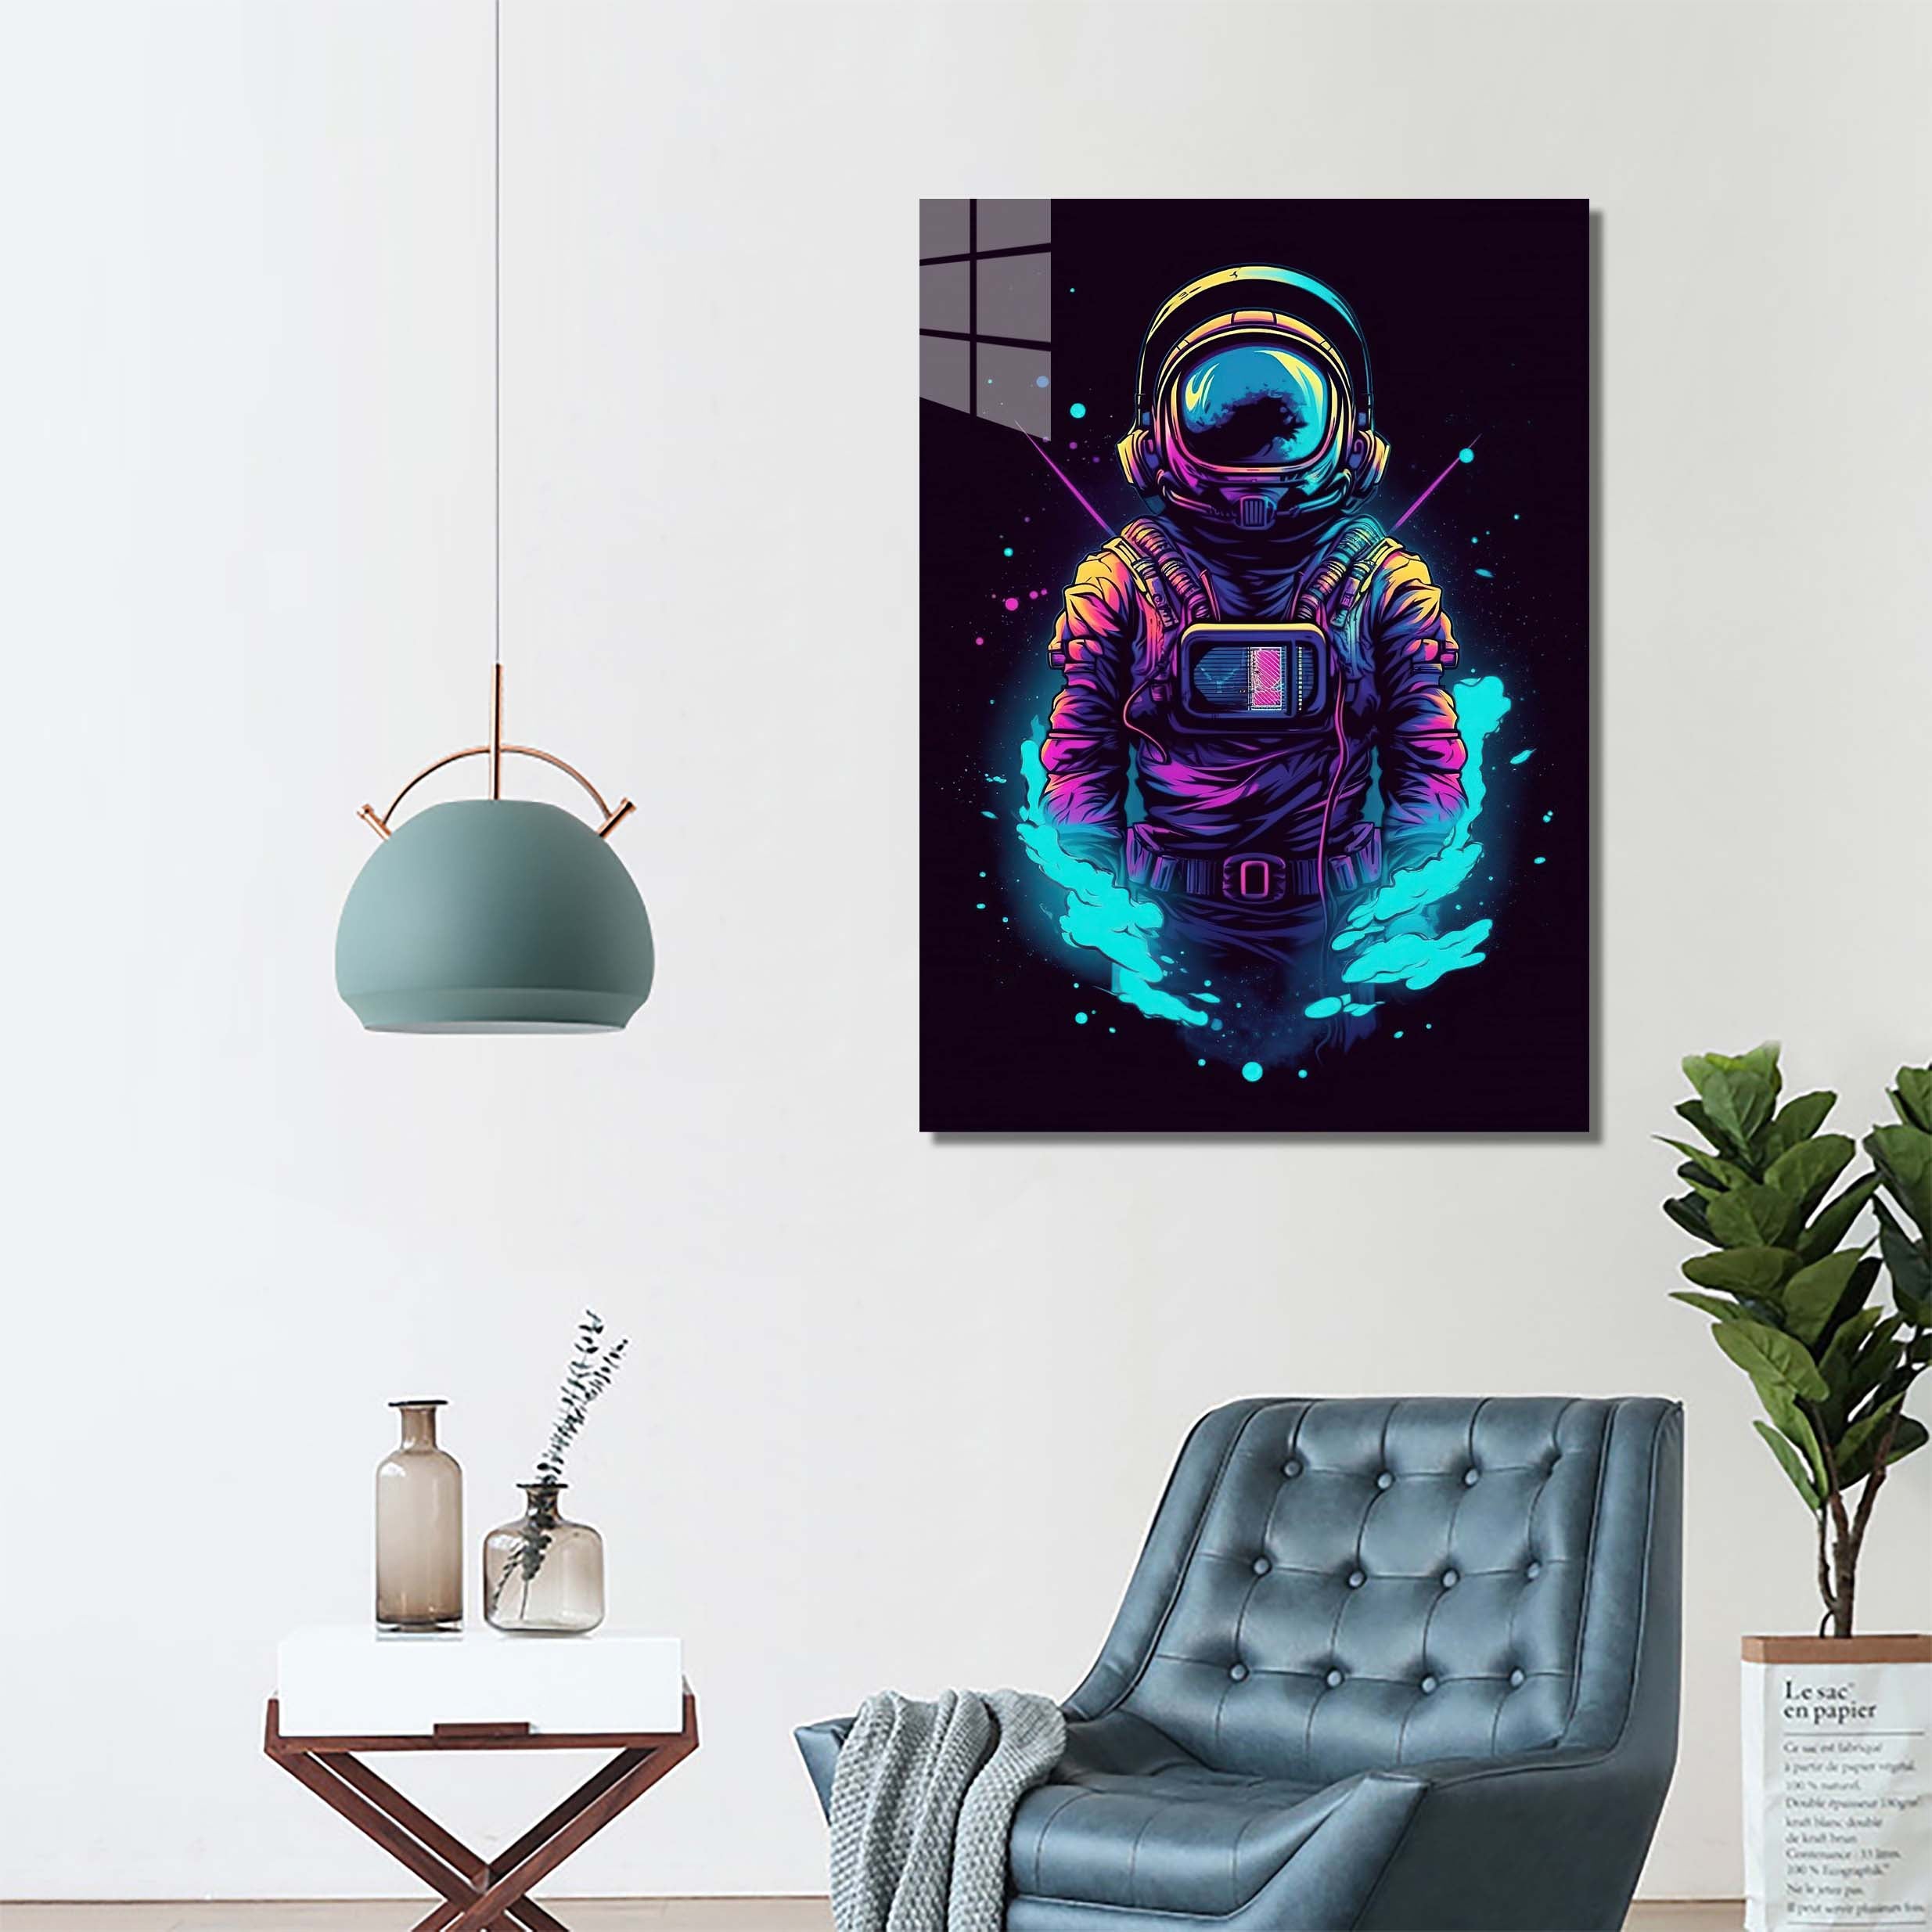 Psychedelic Astronaut 1-designed by @SAMCRO